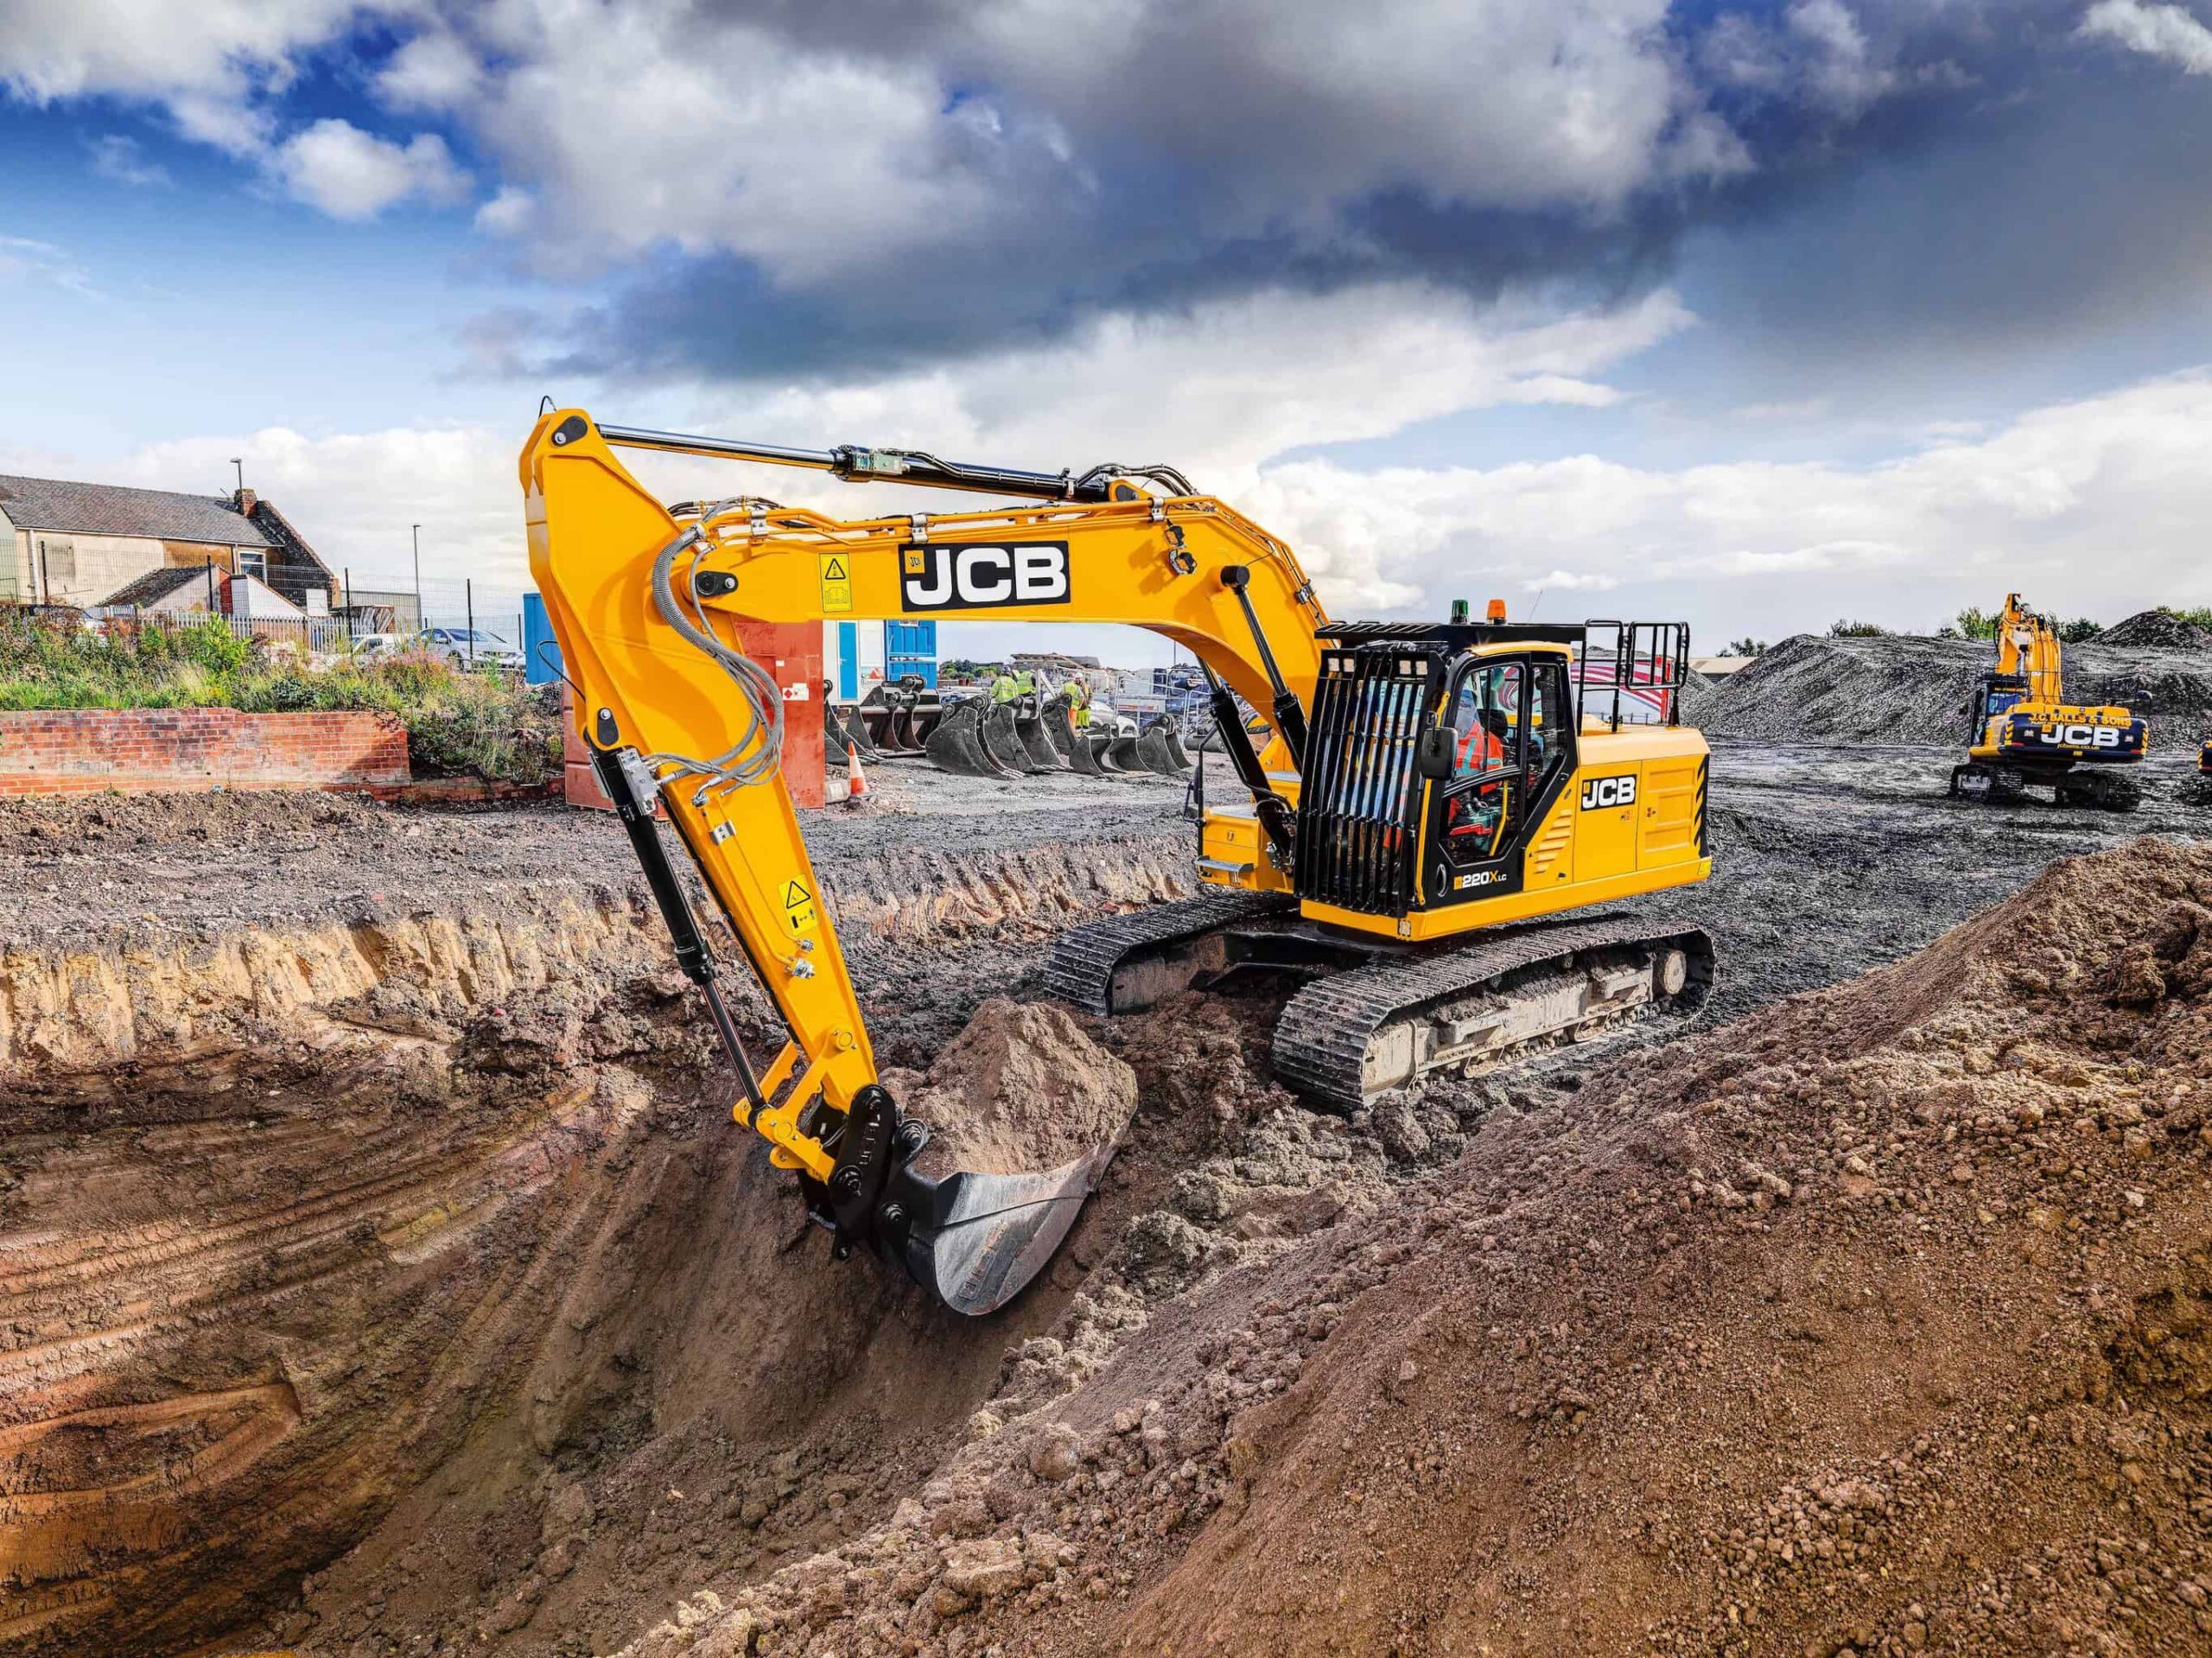 Record sales for JCB as market rebound stays strong